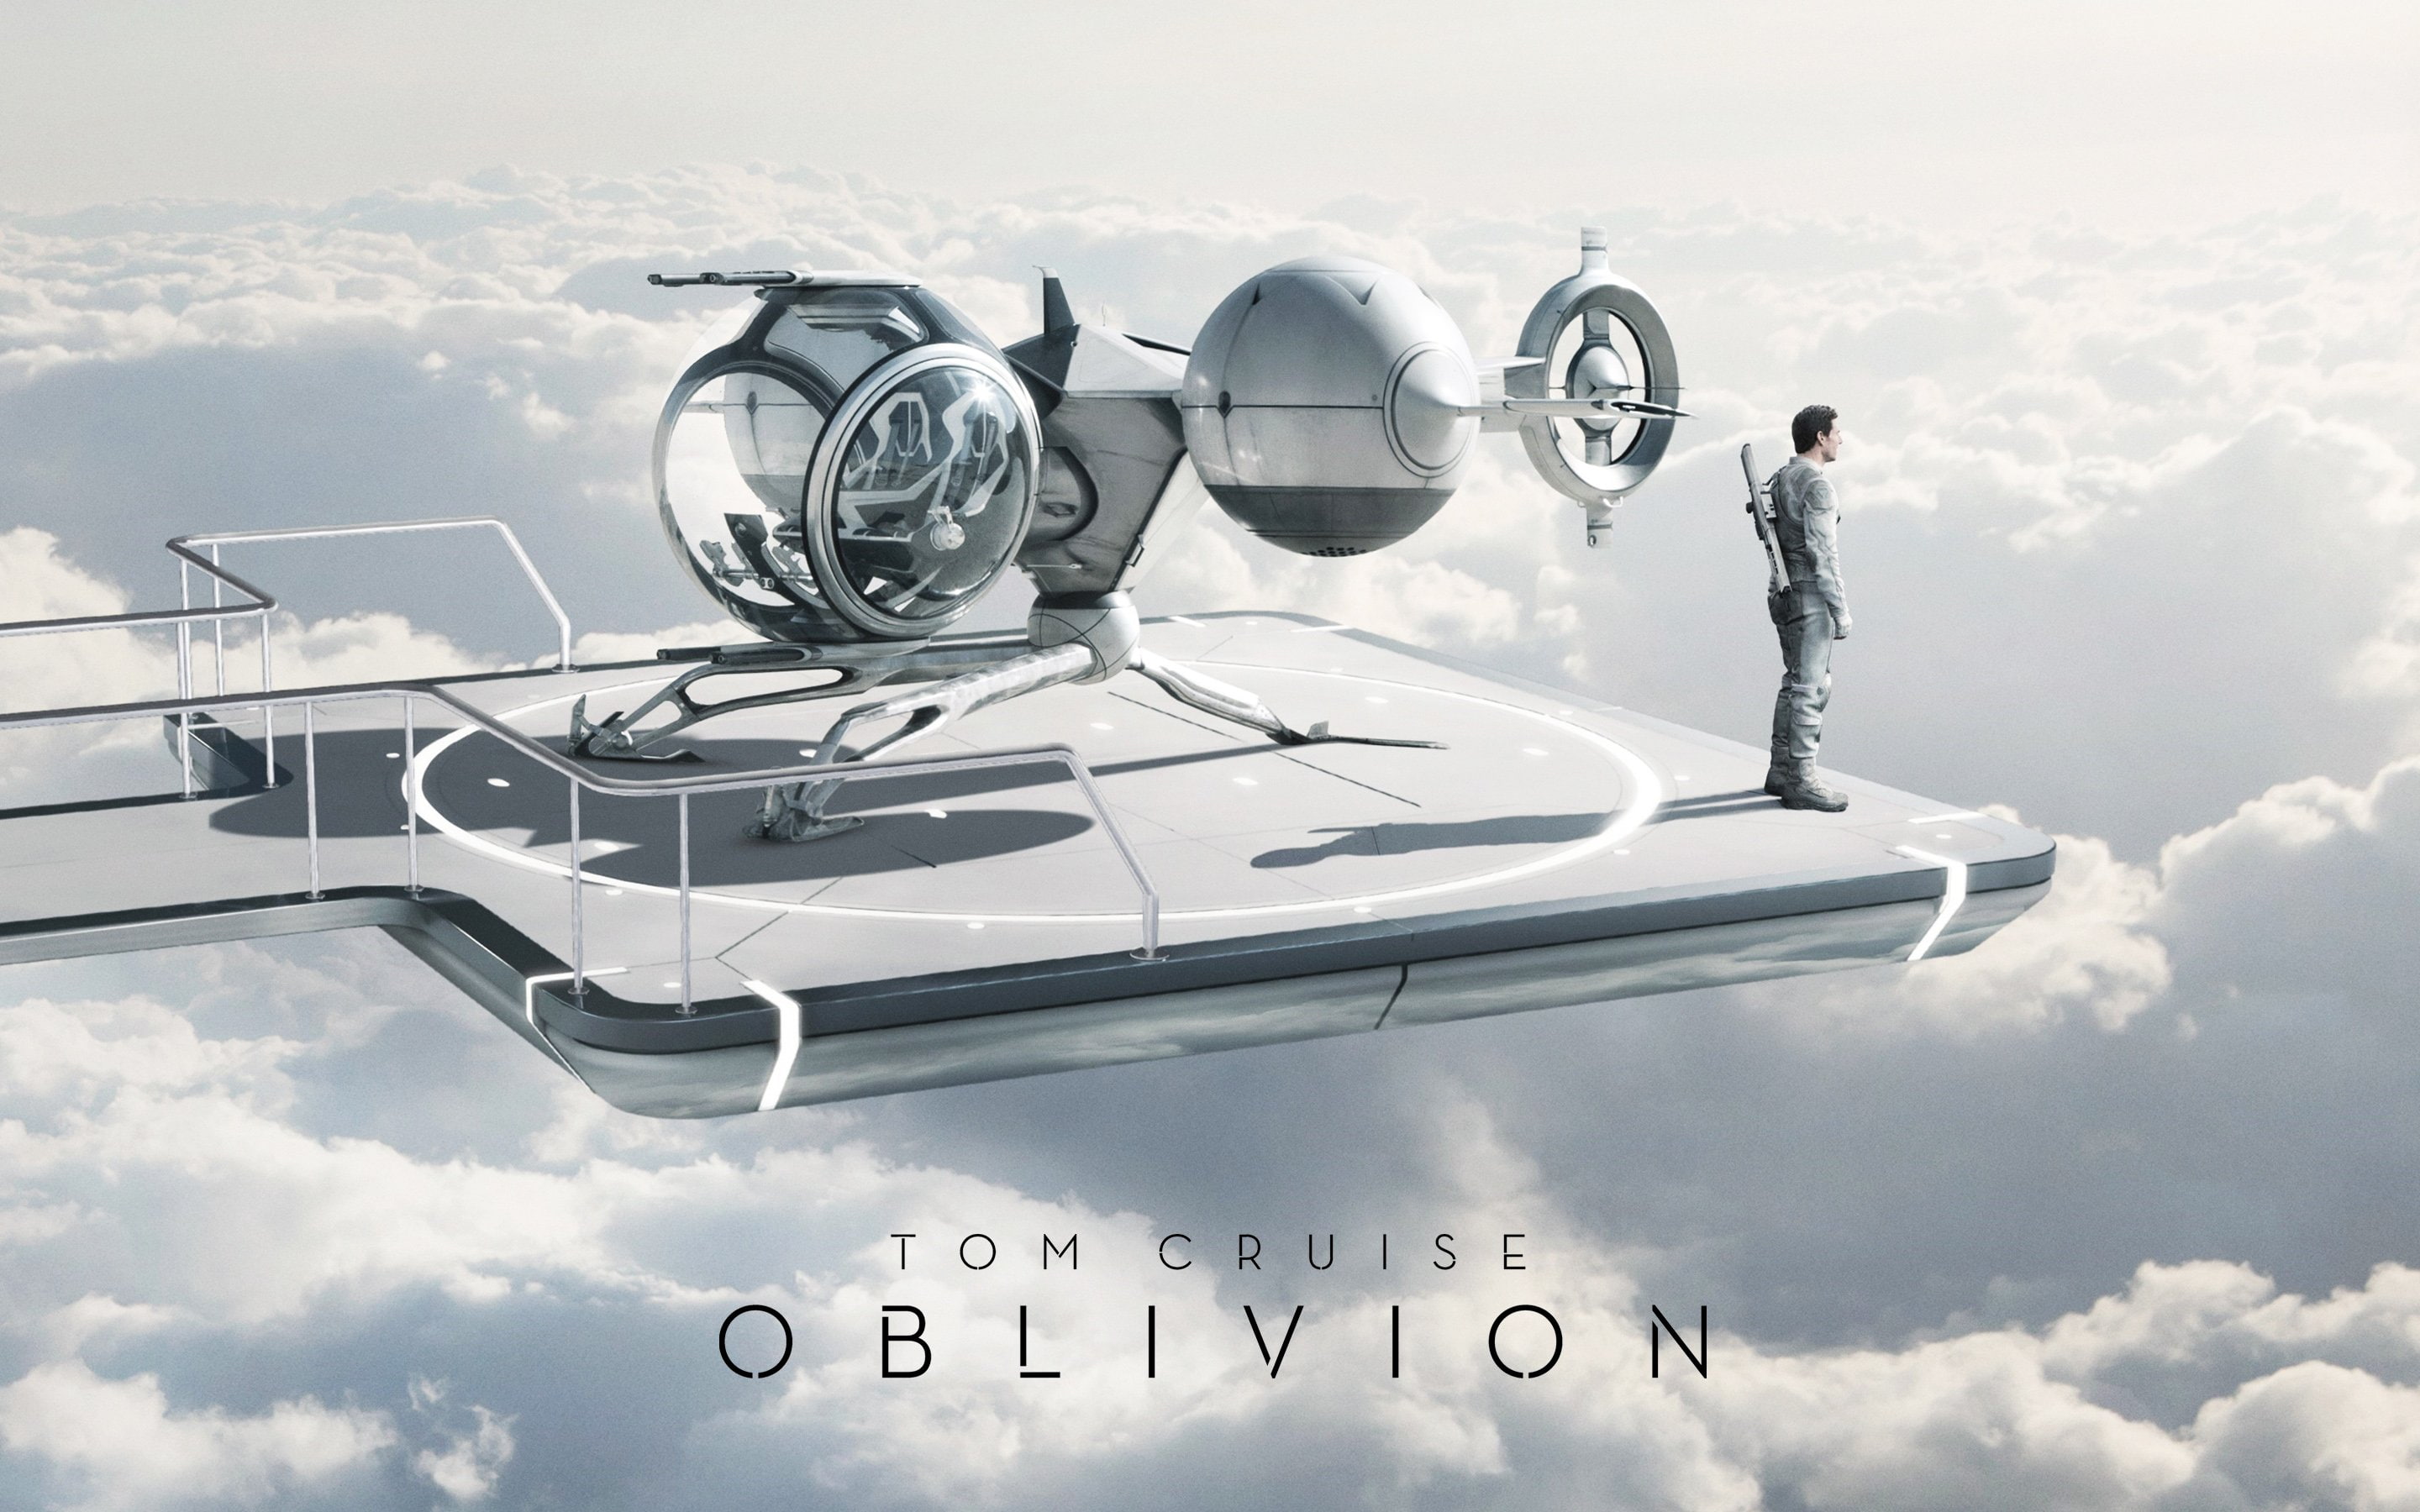 1oblivion, action, apocalyptic, cruise, fighting, futuristic